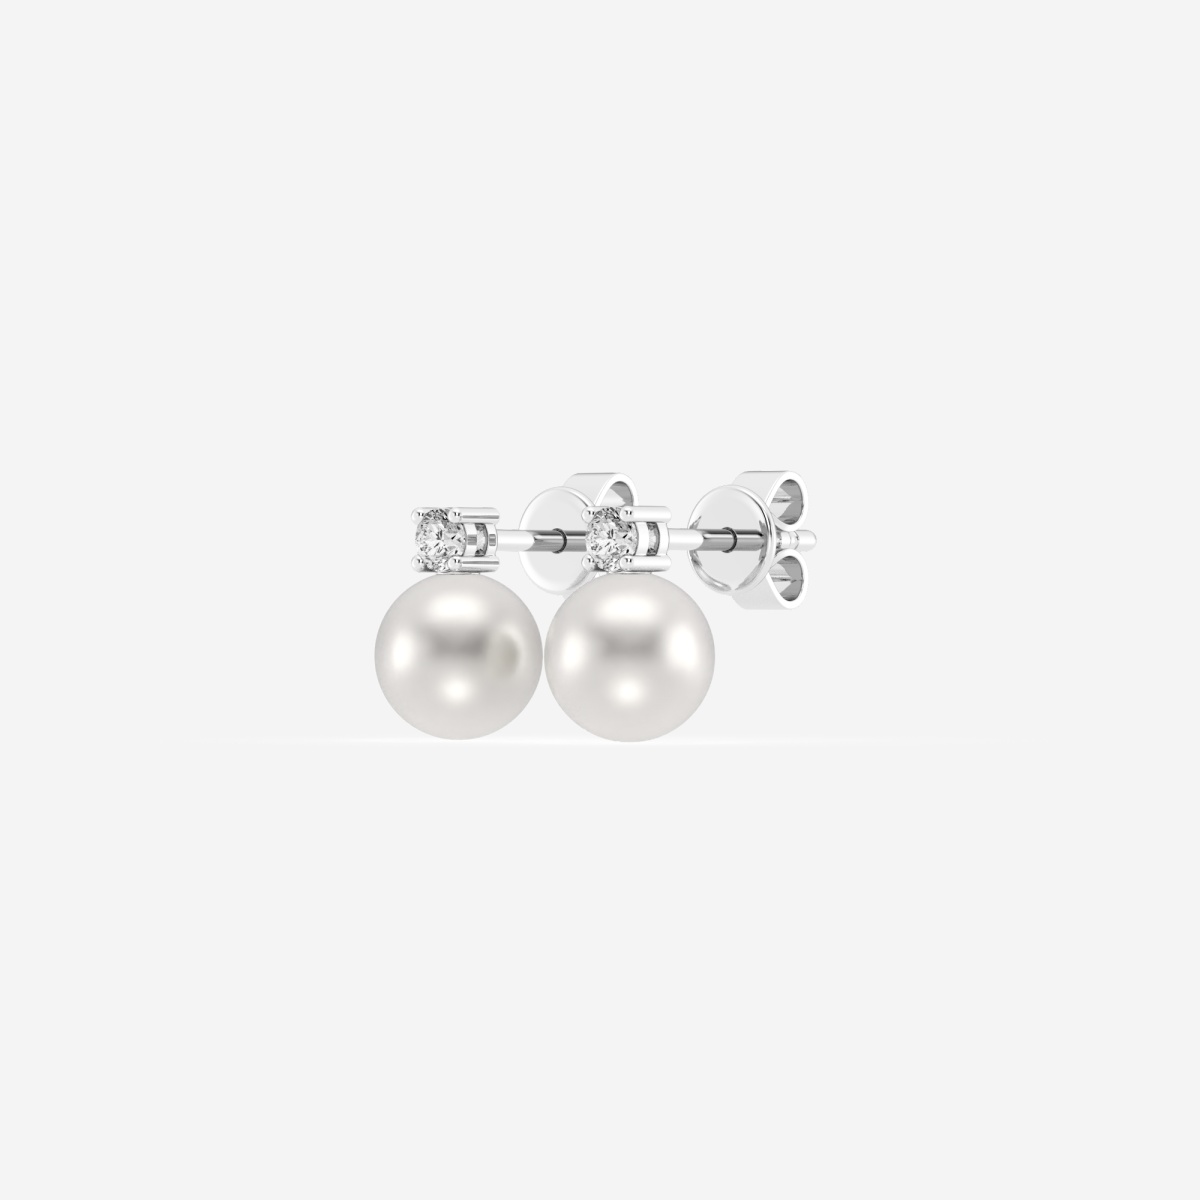 Additional Image 1 for  6.5 - 7.0 mm Cultured Freshwater Pearl and 0 ctw Lab Grown Diamond Stud Earrings